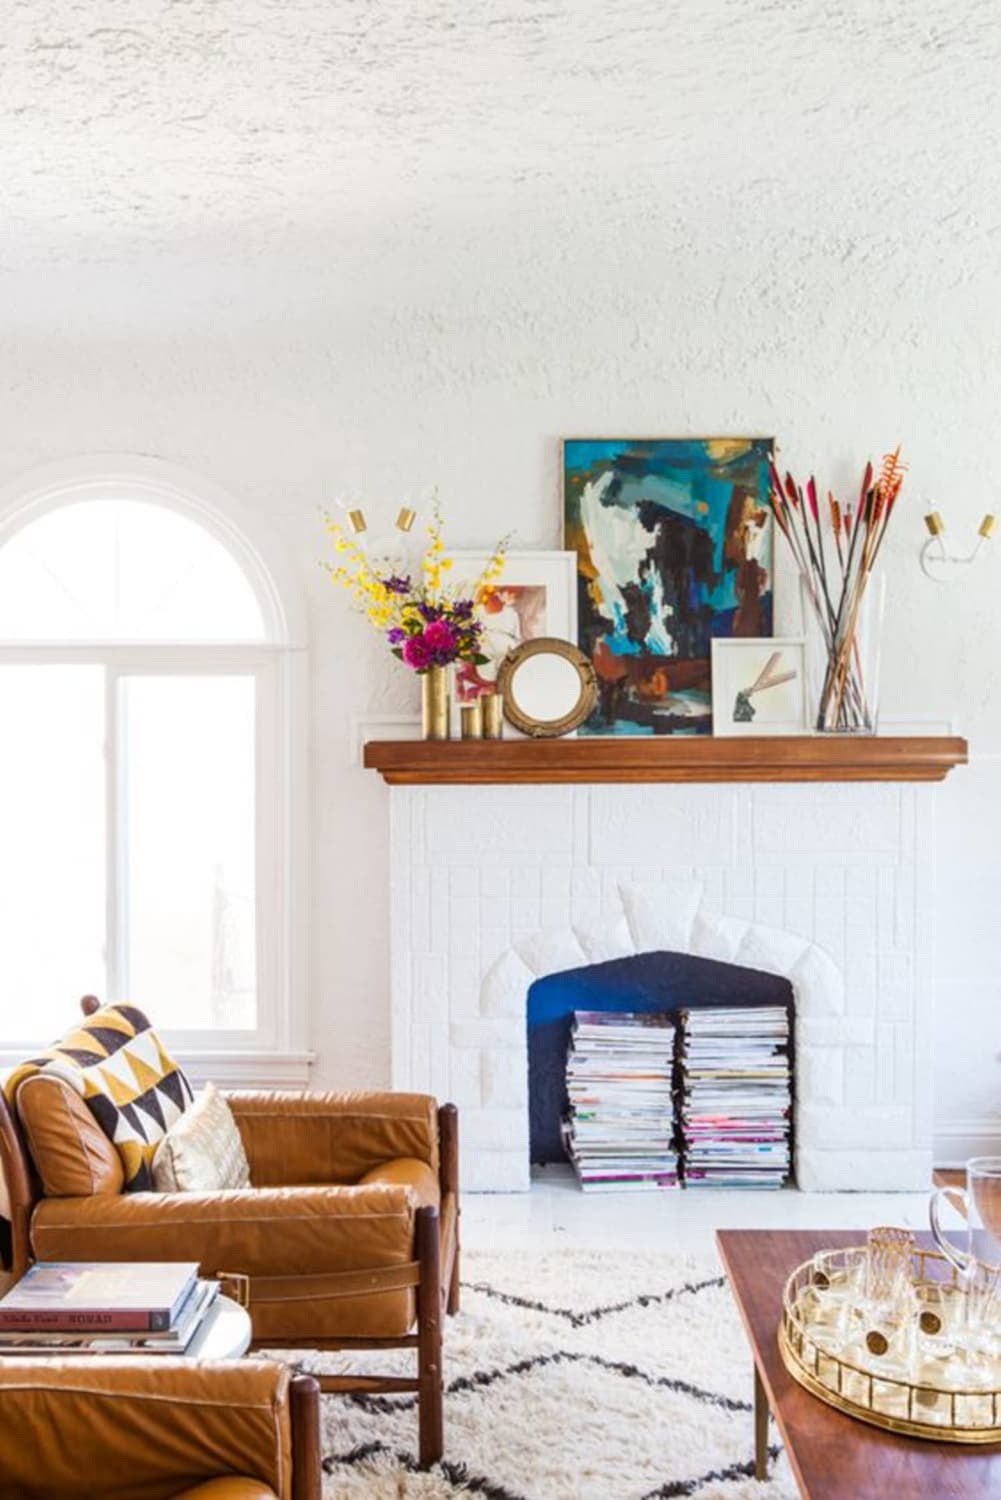 9 Truly Unexpected Places to Add Color to Your Home